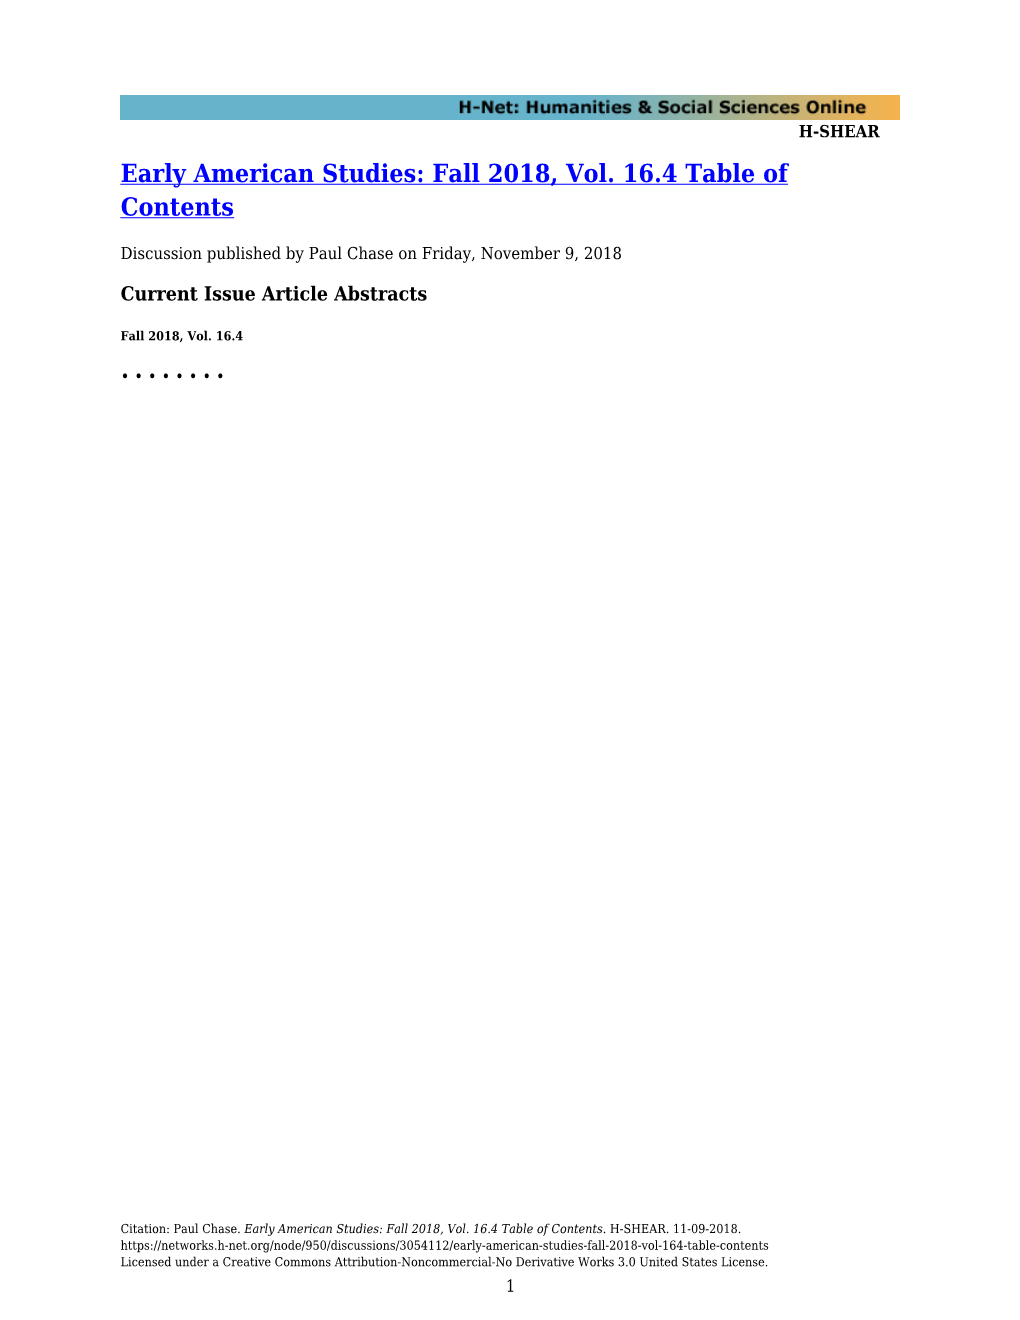 Early American Studies: Fall 2018, Vol. 16.4 Table of Contents